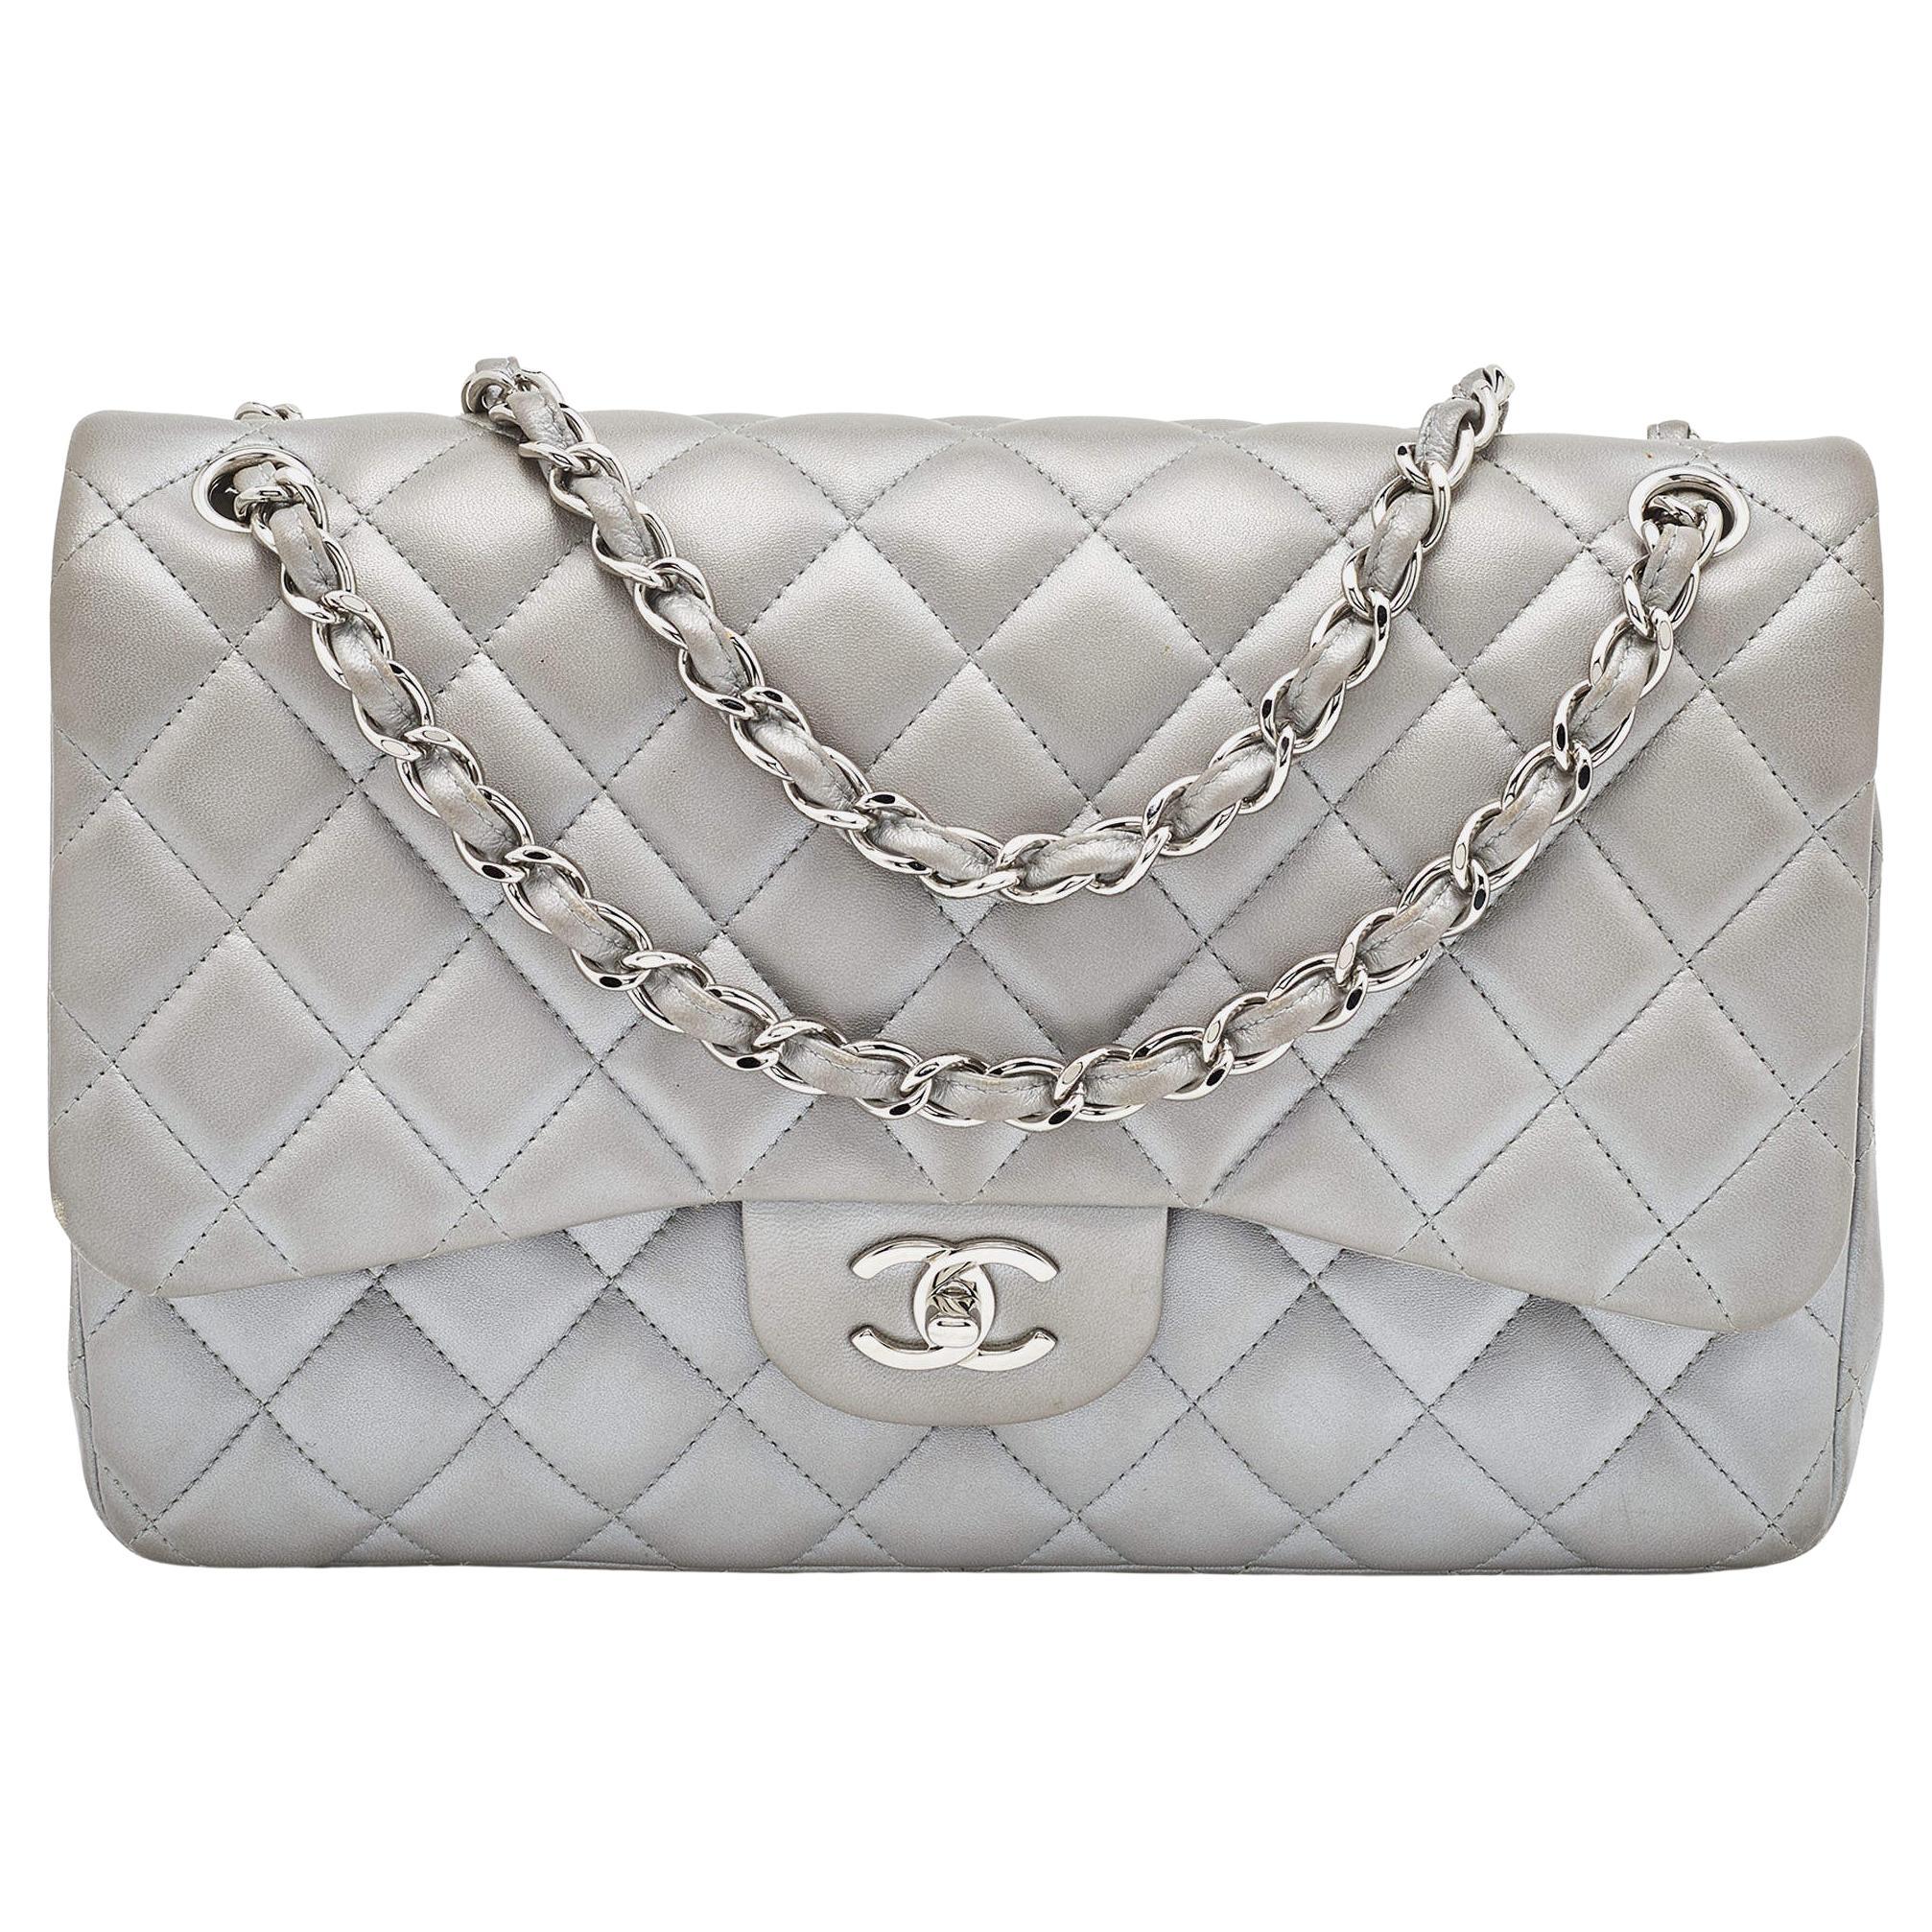 Silver Chanel Flap Bag - 715 For Sale on 1stDibs